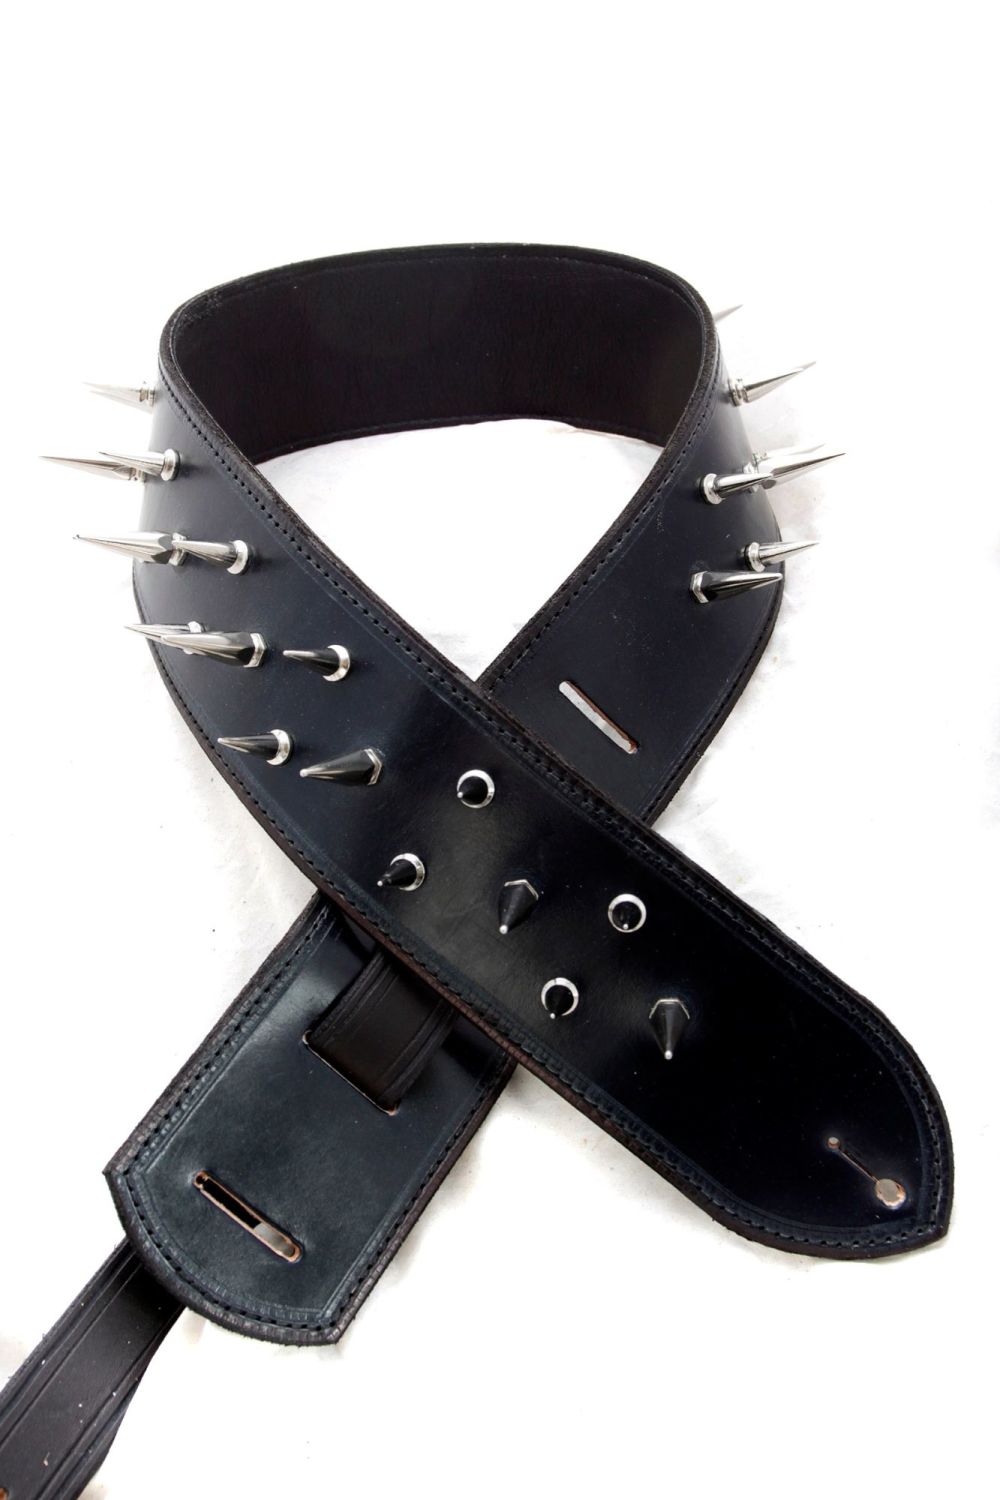 Handmade Black Leather Guitar Strap with Spikes